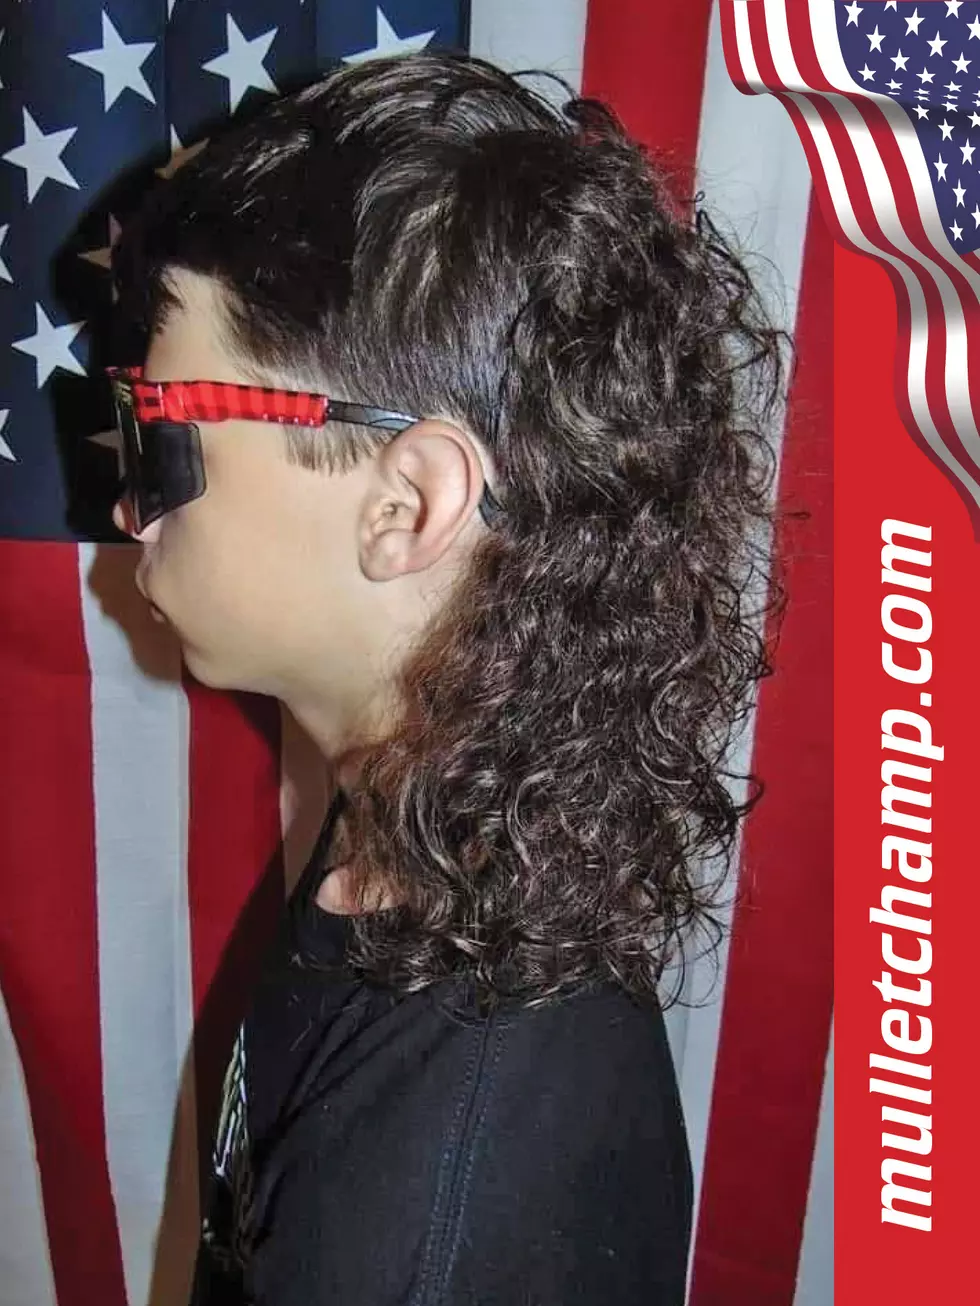 Michigan Kid In Running For Top Mullet In The US